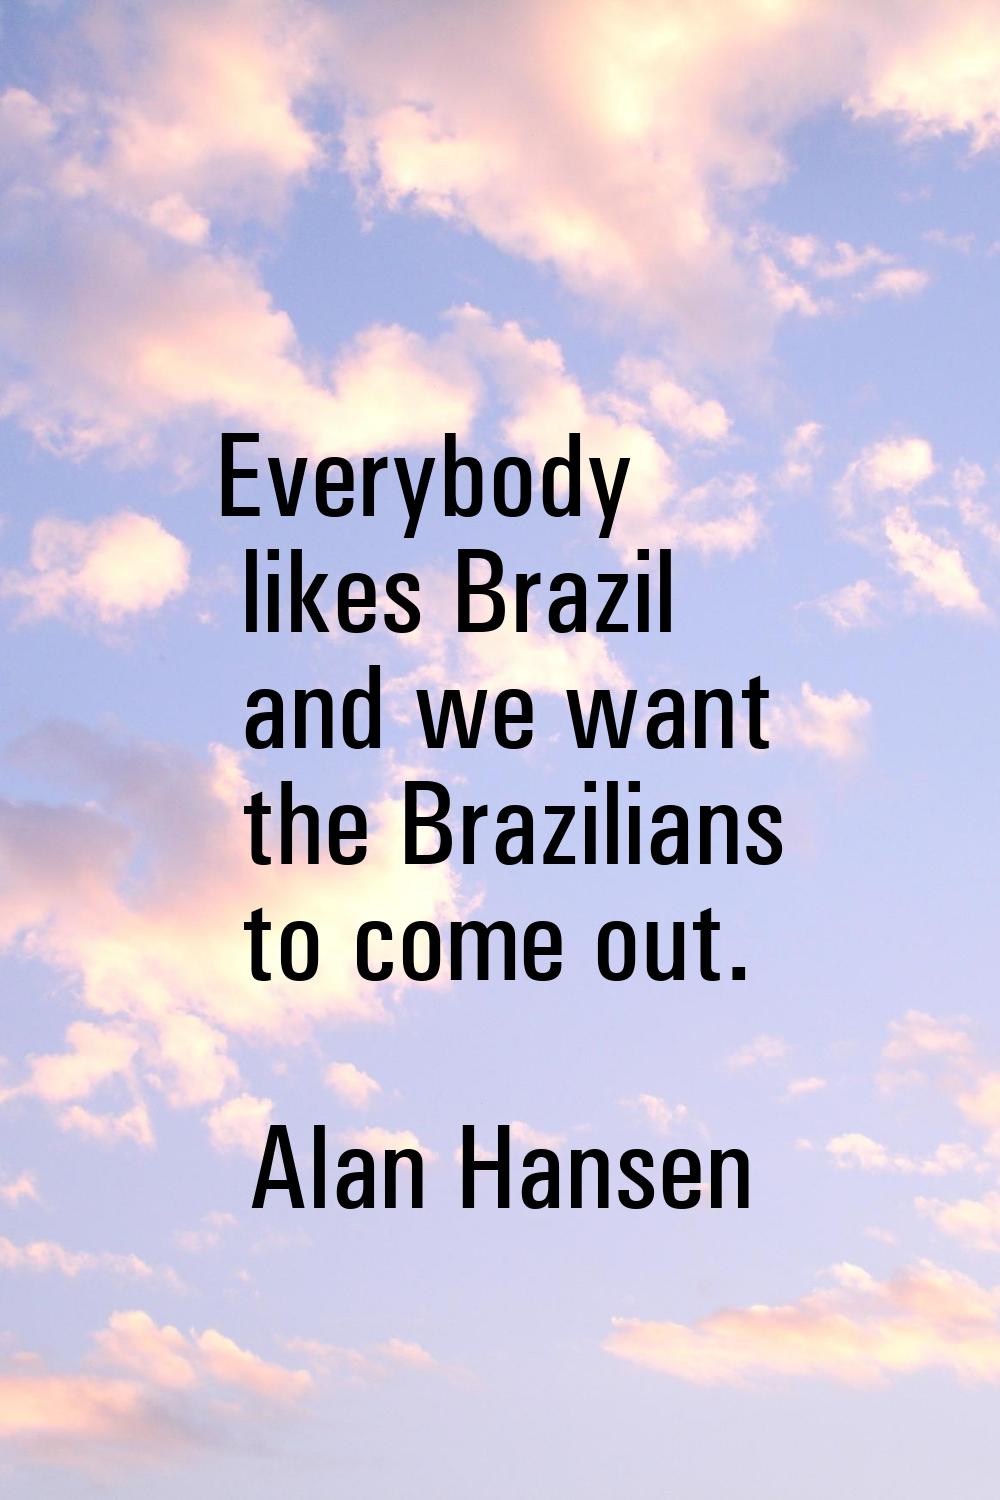 Everybody likes Brazil and we want the Brazilians to come out.